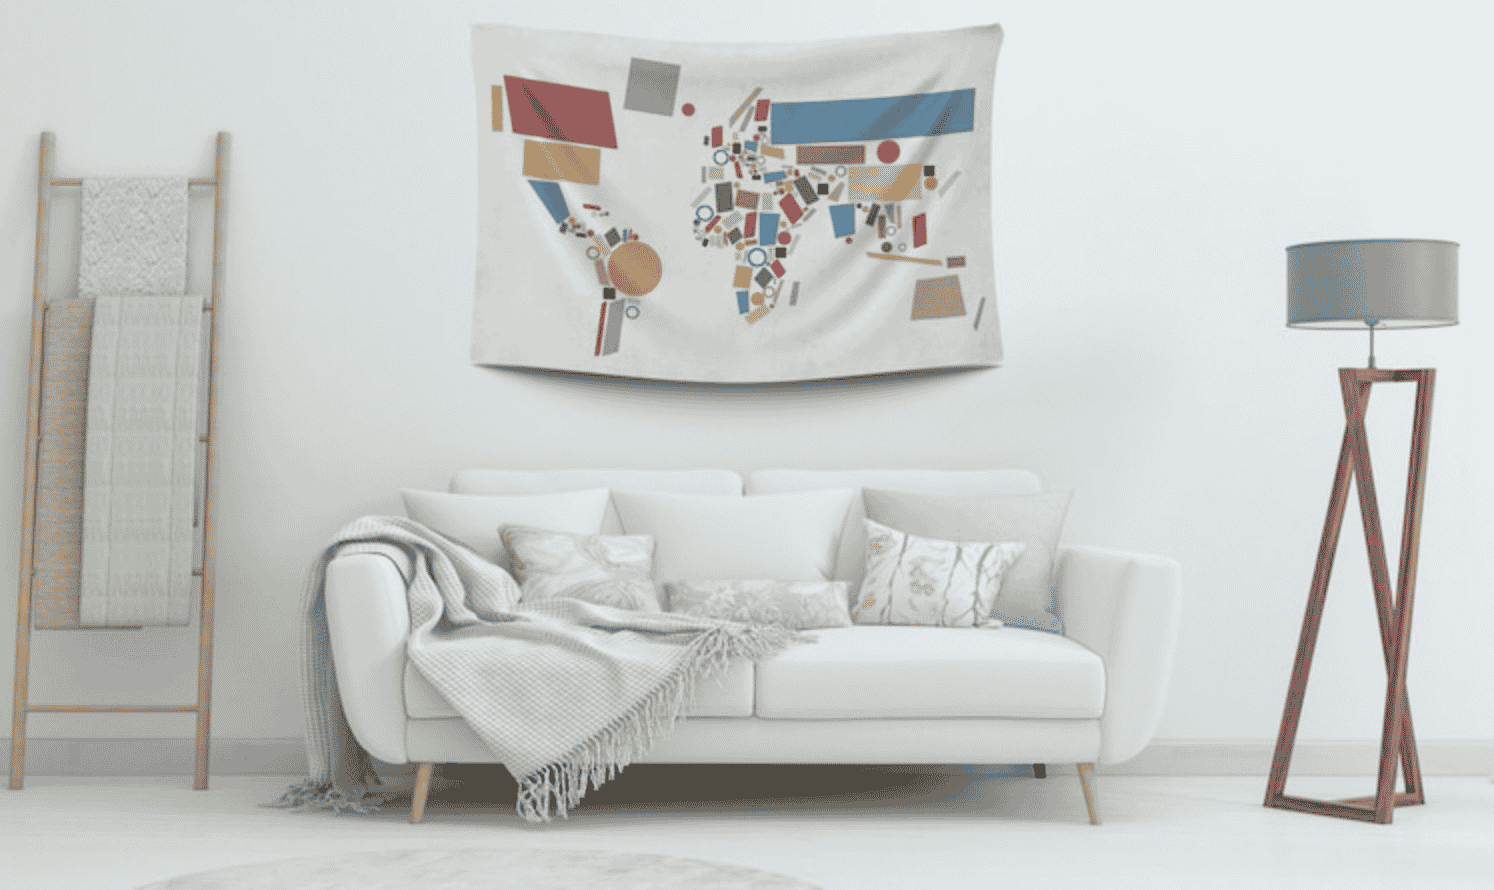 The Use of Tapestries in Interior Design